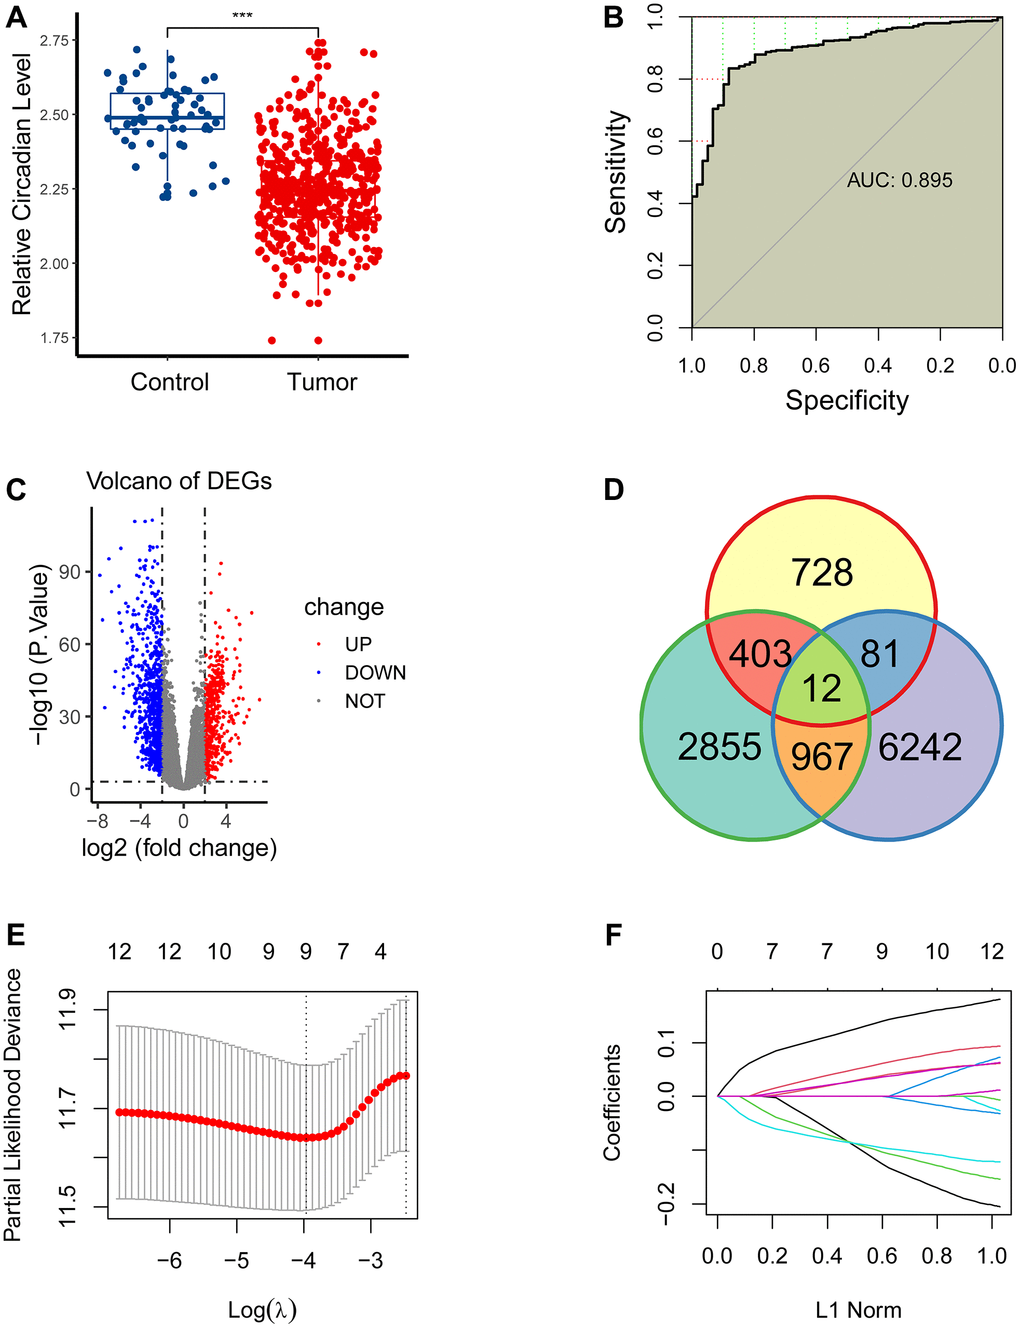 Construction of a novel gene signature. (A) CR levels were significantly upregulated in the para-cancerous samples compared to the tumor samples. (B) CR levels could distinguish tumor patients with normal patients, with area under curve (AUC) of 0.895. (C) 1224 differentially expressed genes (DEGs) were obtained between the paracancerous and tumor groups. (D) 12 eligible CR-related genes were acquired by intersecting 1224 DEGs, 4237 prognostically relevant genes and 7302 CR-related genes. (E, F) 12 eligible CR-genes were further screened using LASSO regression analysis.